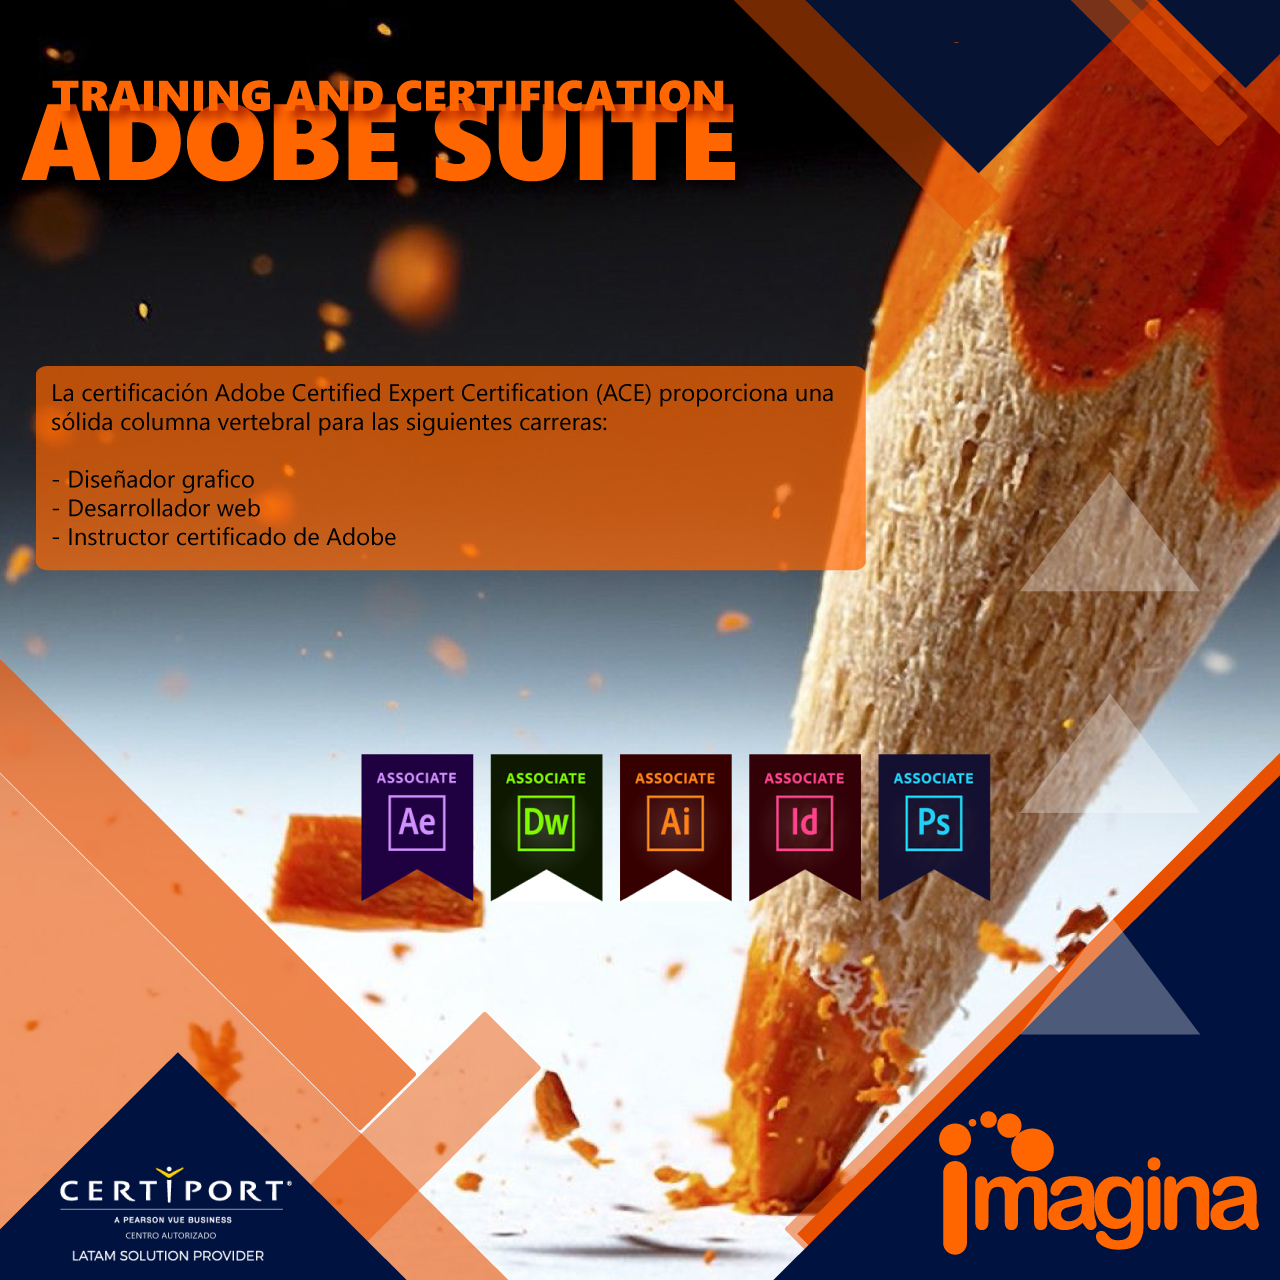 TRAINING AND CERTIFICATION ADOBE SUITE